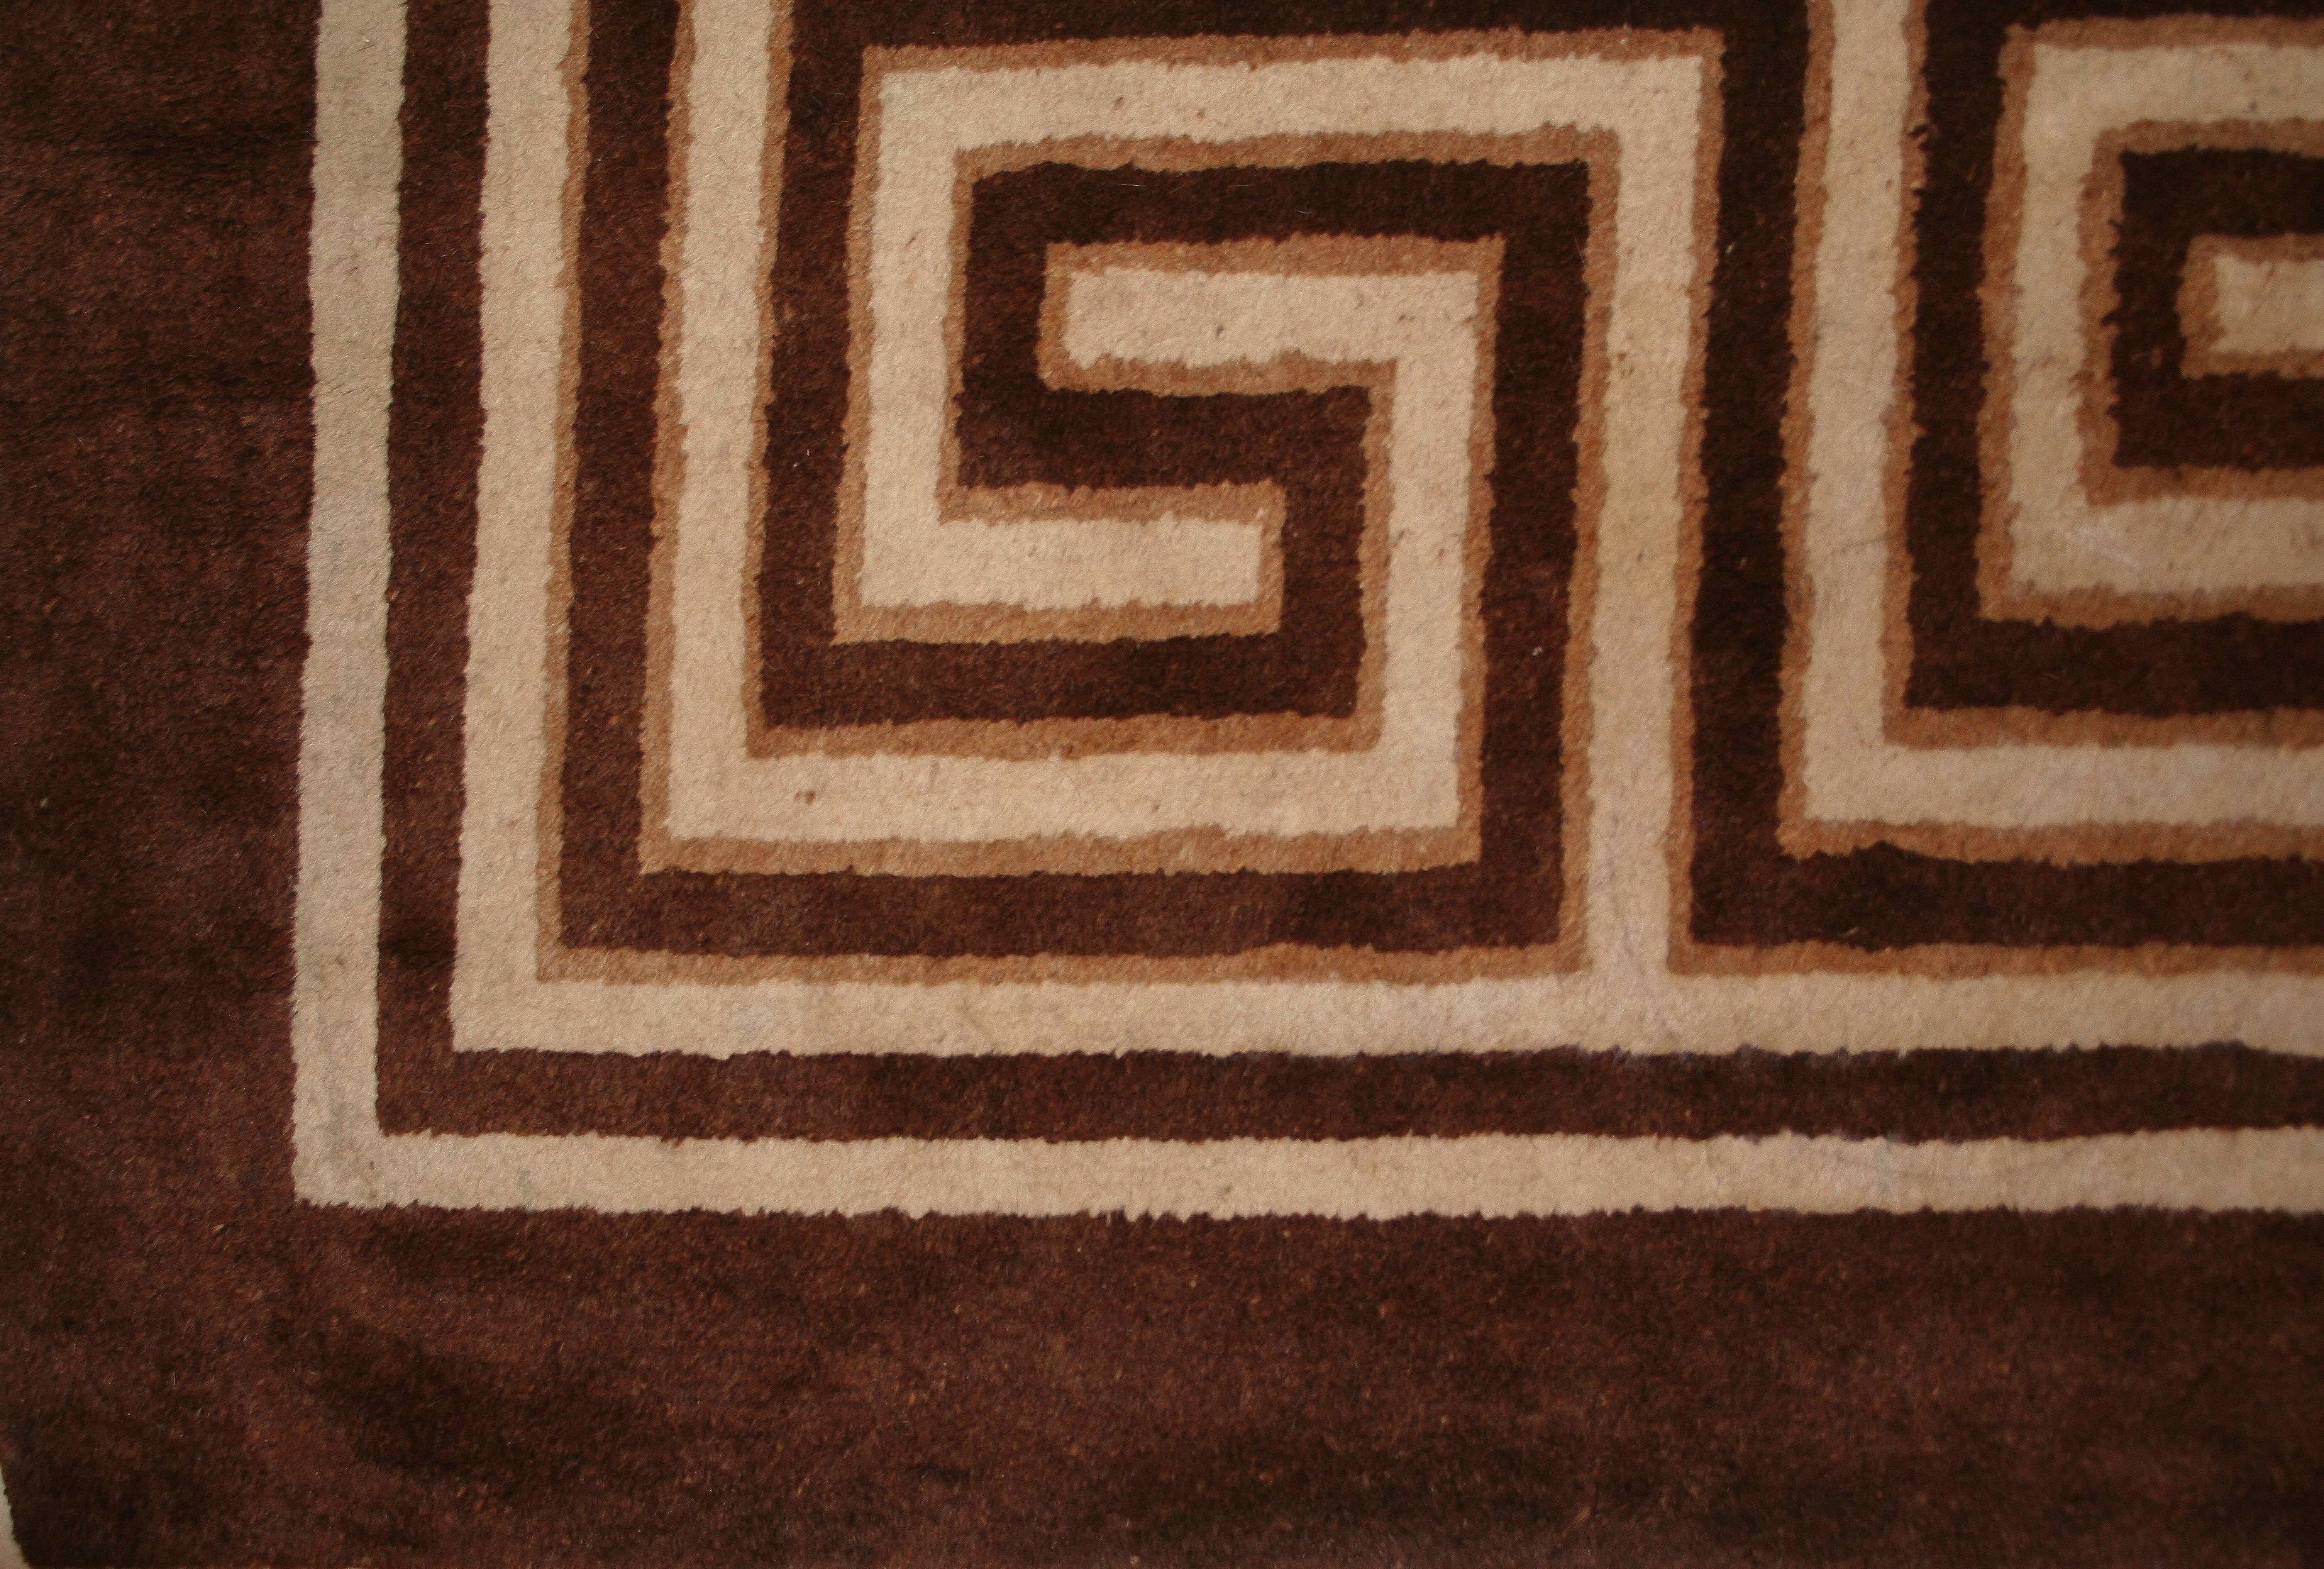 The geometric lattice scheme and the wide, almost three-dimensional Greek fret border that distinguishes this rare Mongolian carpet is clearly inspired from the early carpets of the Ningxia region. The exclusive use of undyed natural wool, ivory and